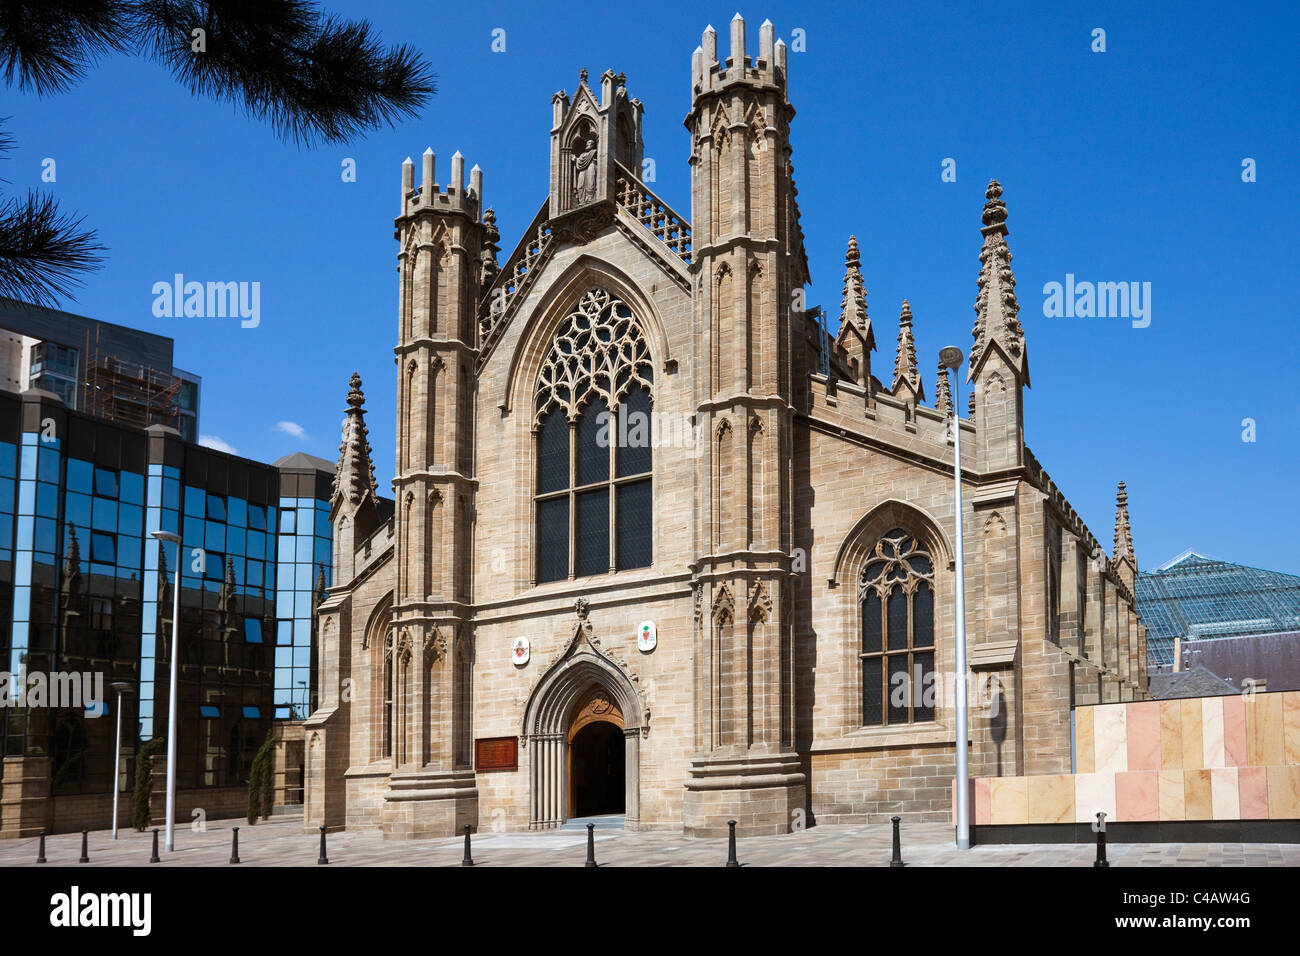 Saint Andrews Cathedral, Clyde Street, Glasgow, Scotland.The church has recently been renovated. Stock Photo